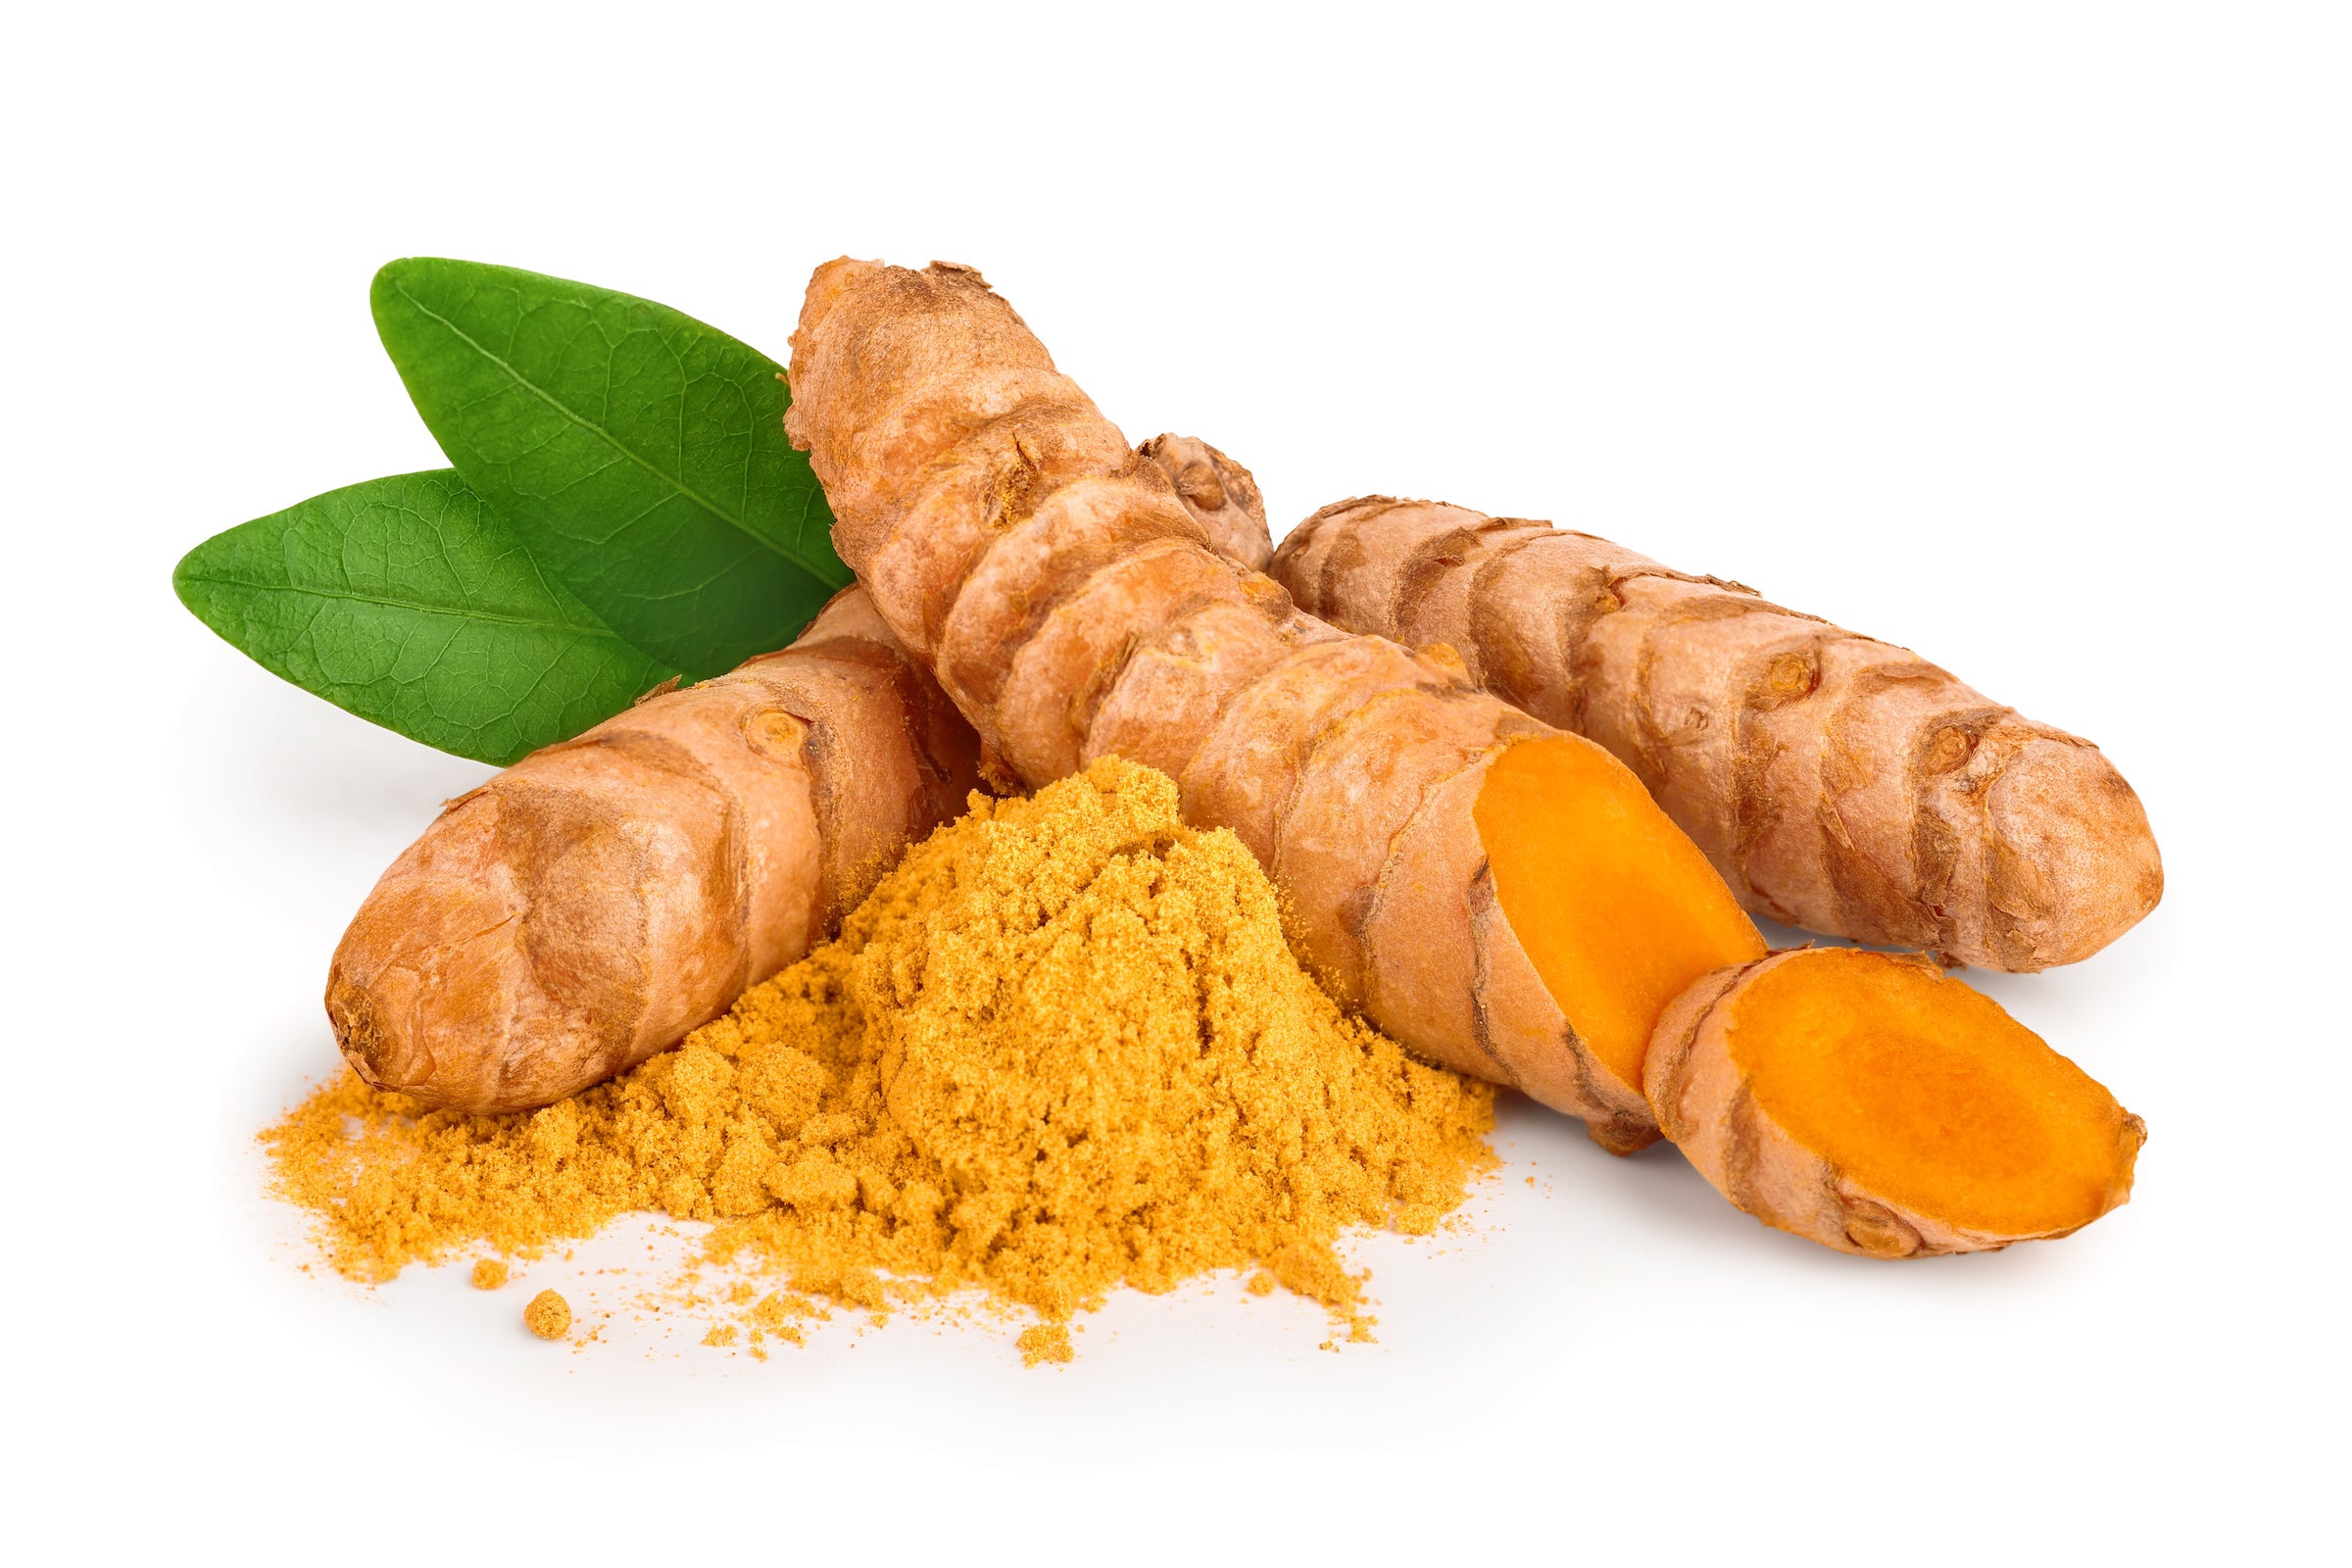 Curcumin: The Golden Spice for Inflammation and Antioxidant Support